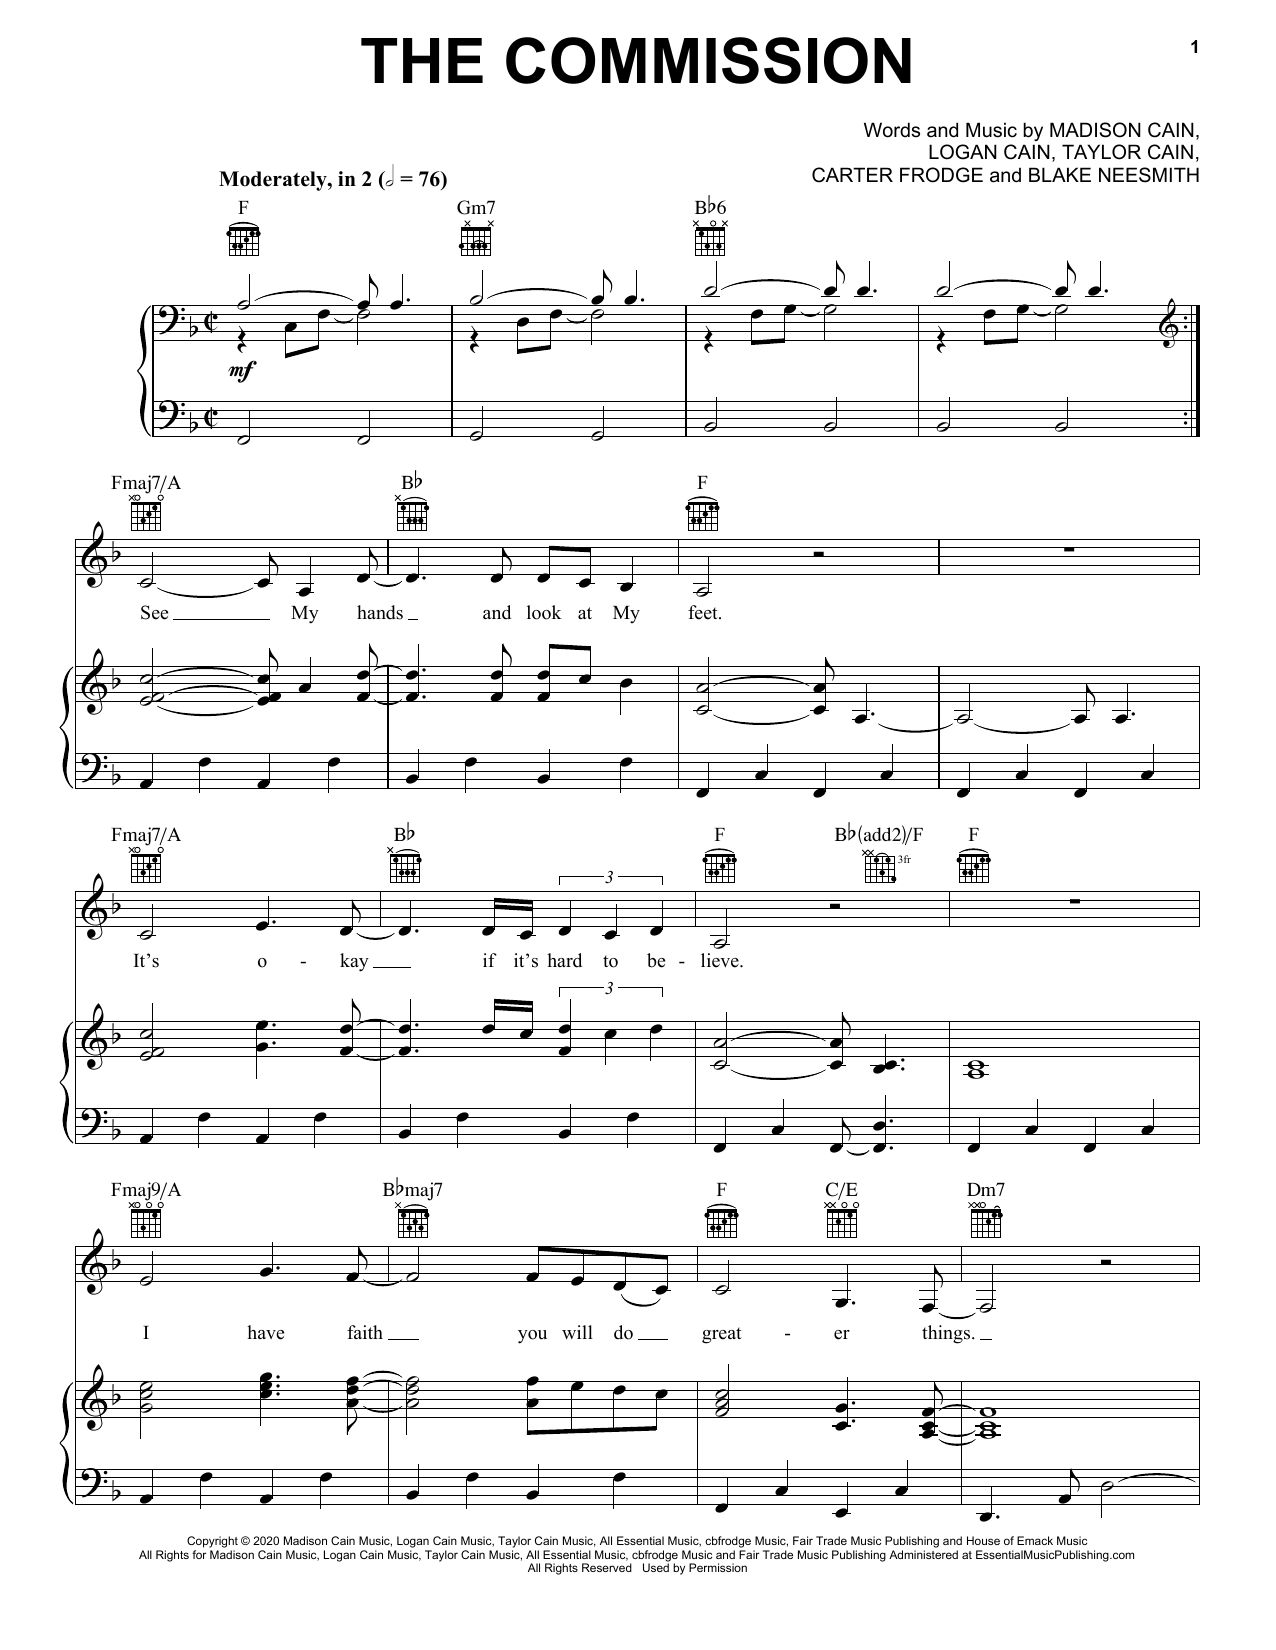 CAIN The Commission sheet music notes and chords. Download Printable PDF.